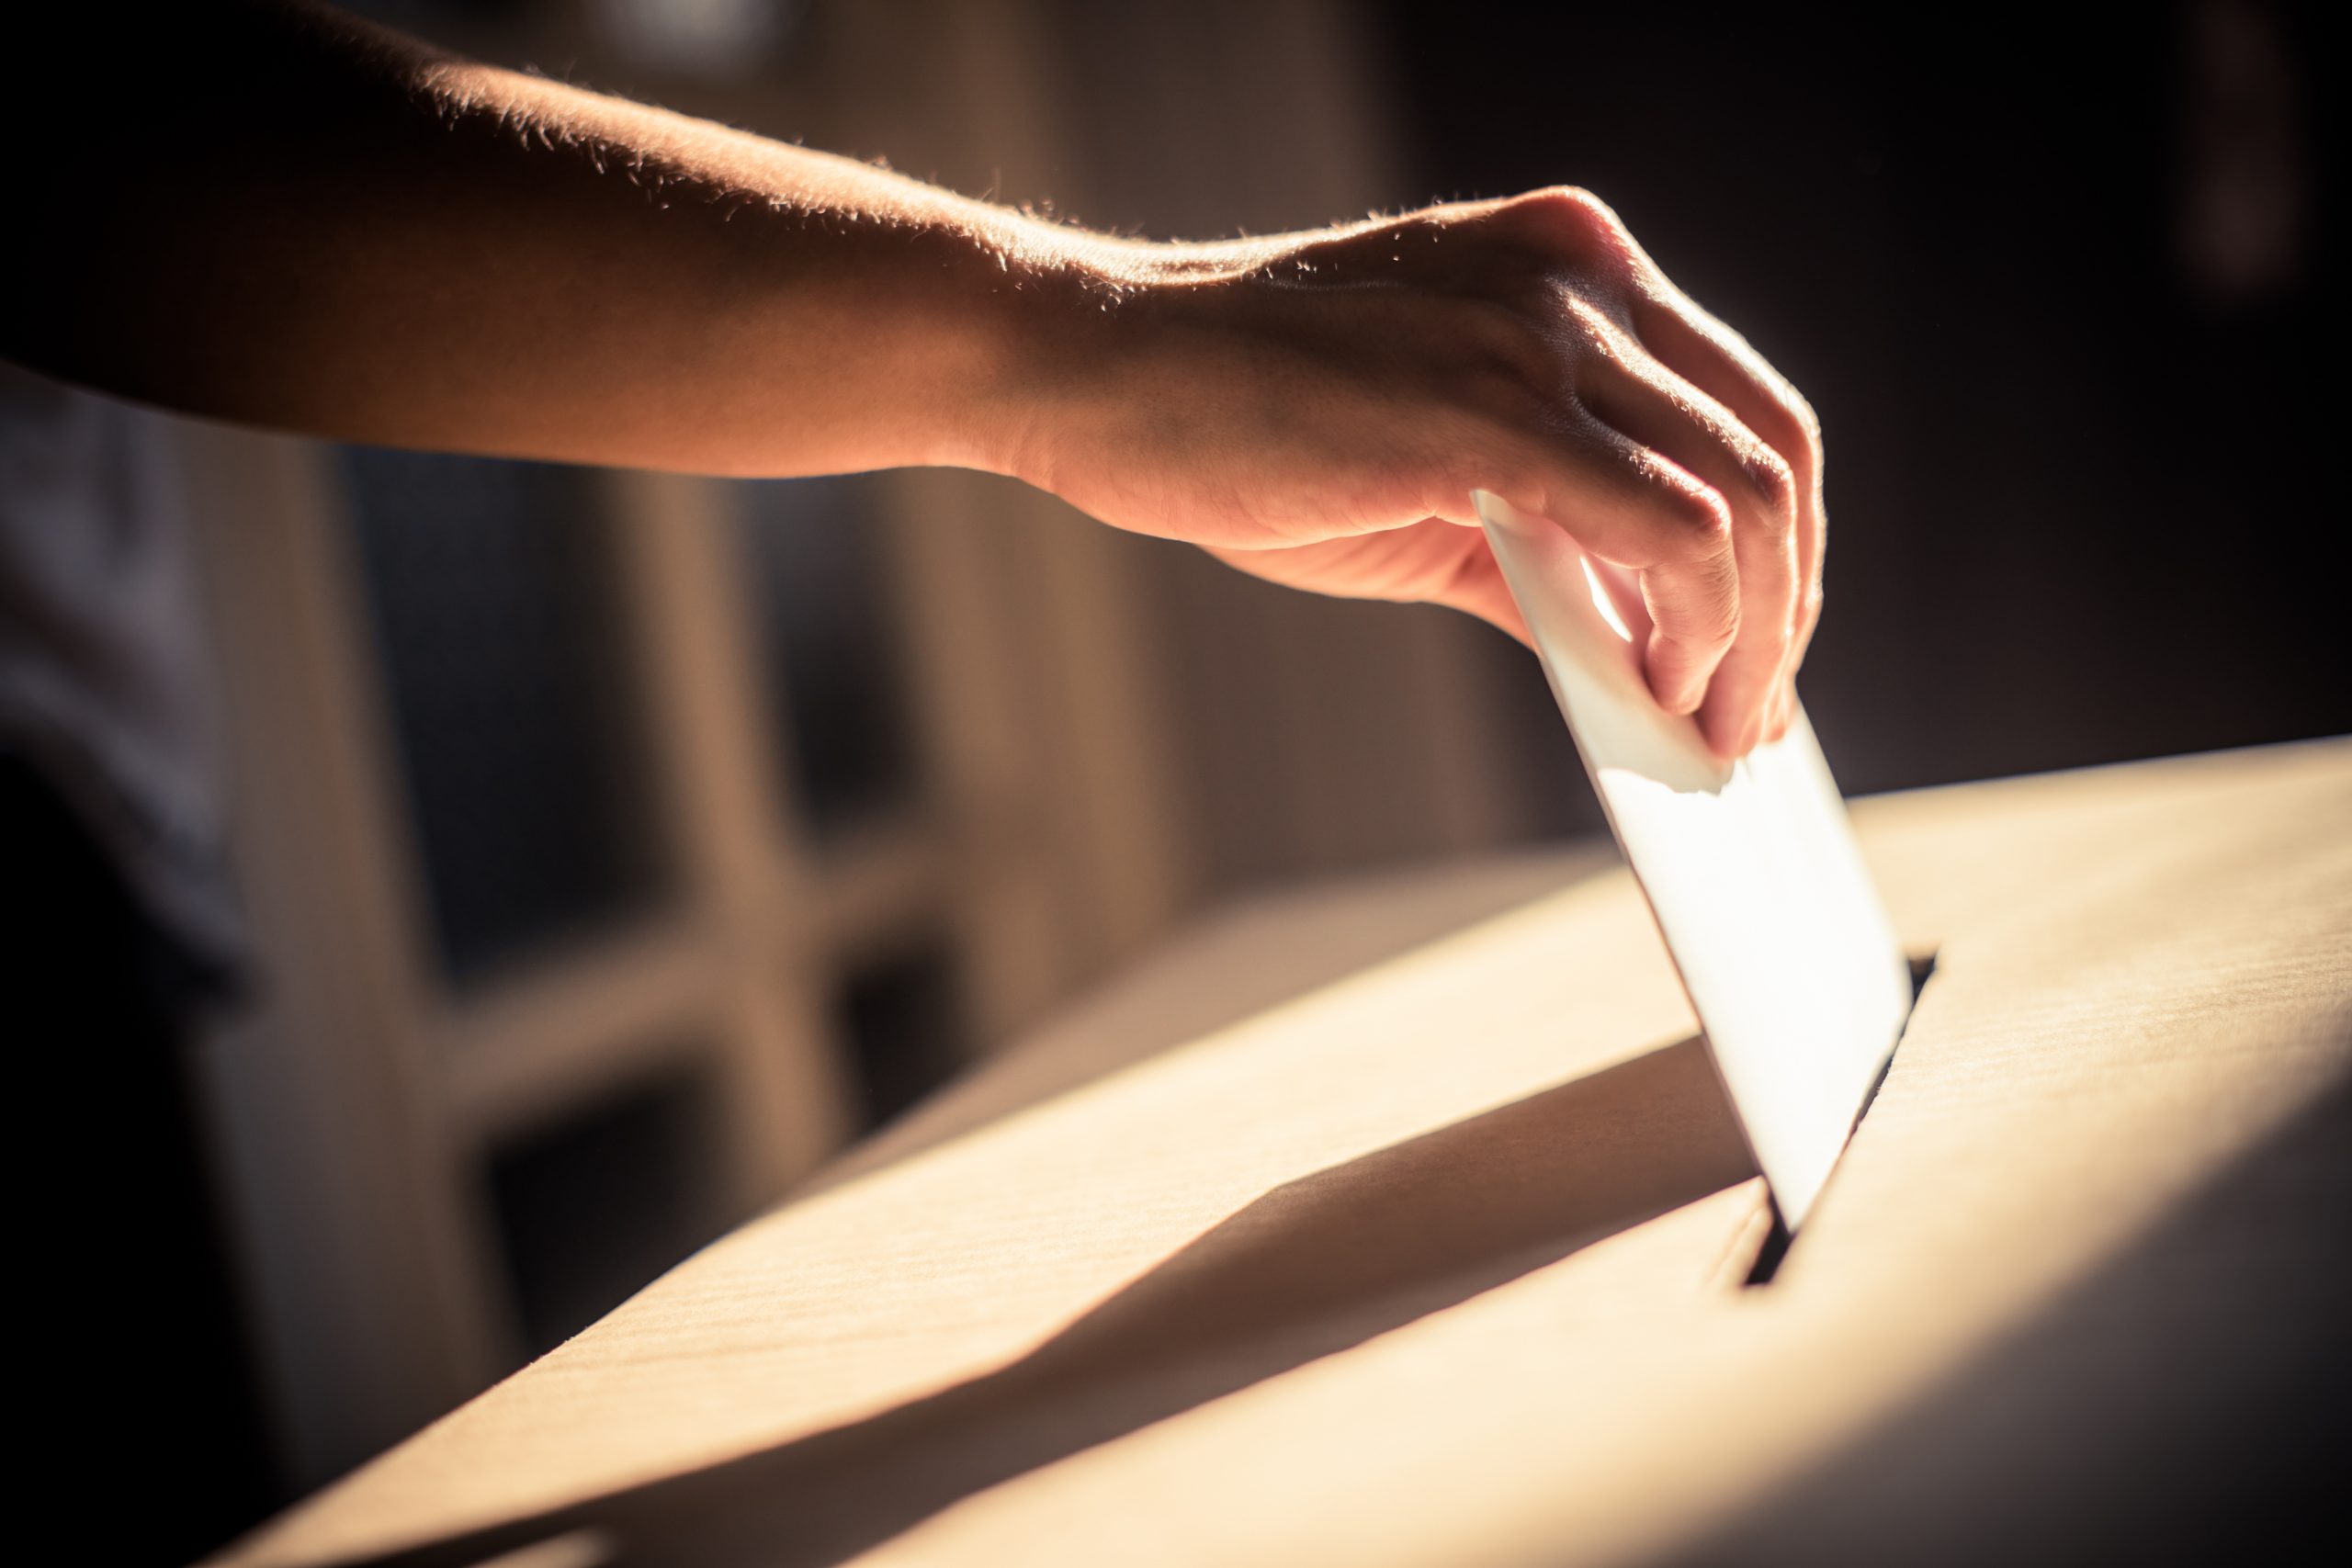 A hand places a voting form in a ballot box